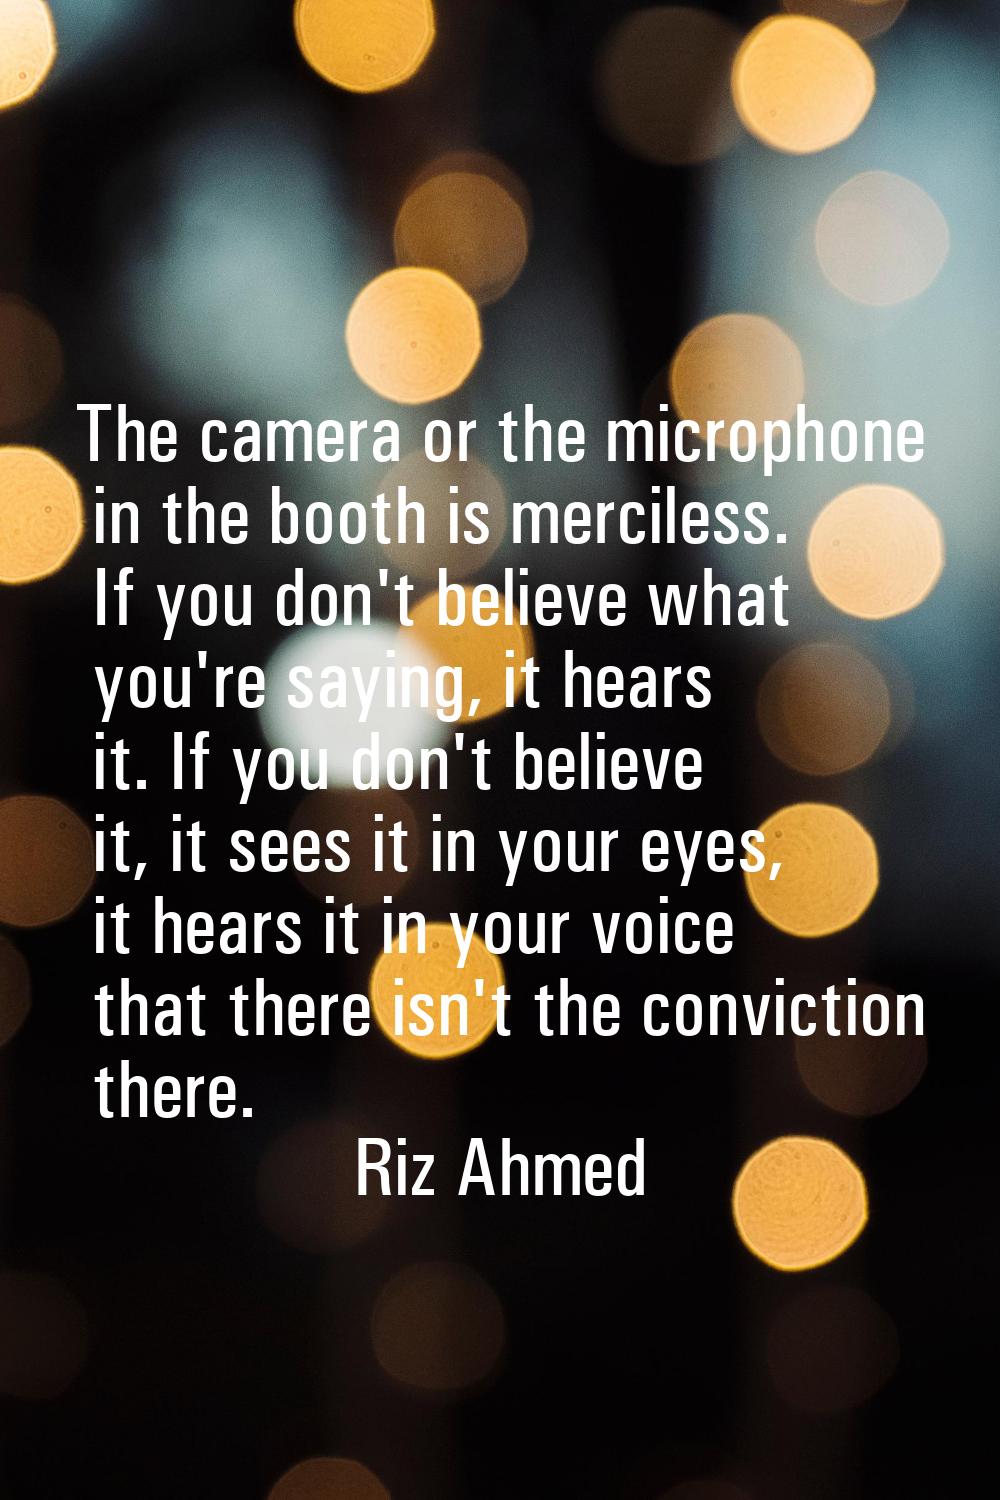 The camera or the microphone in the booth is merciless. If you don't believe what you're saying, it